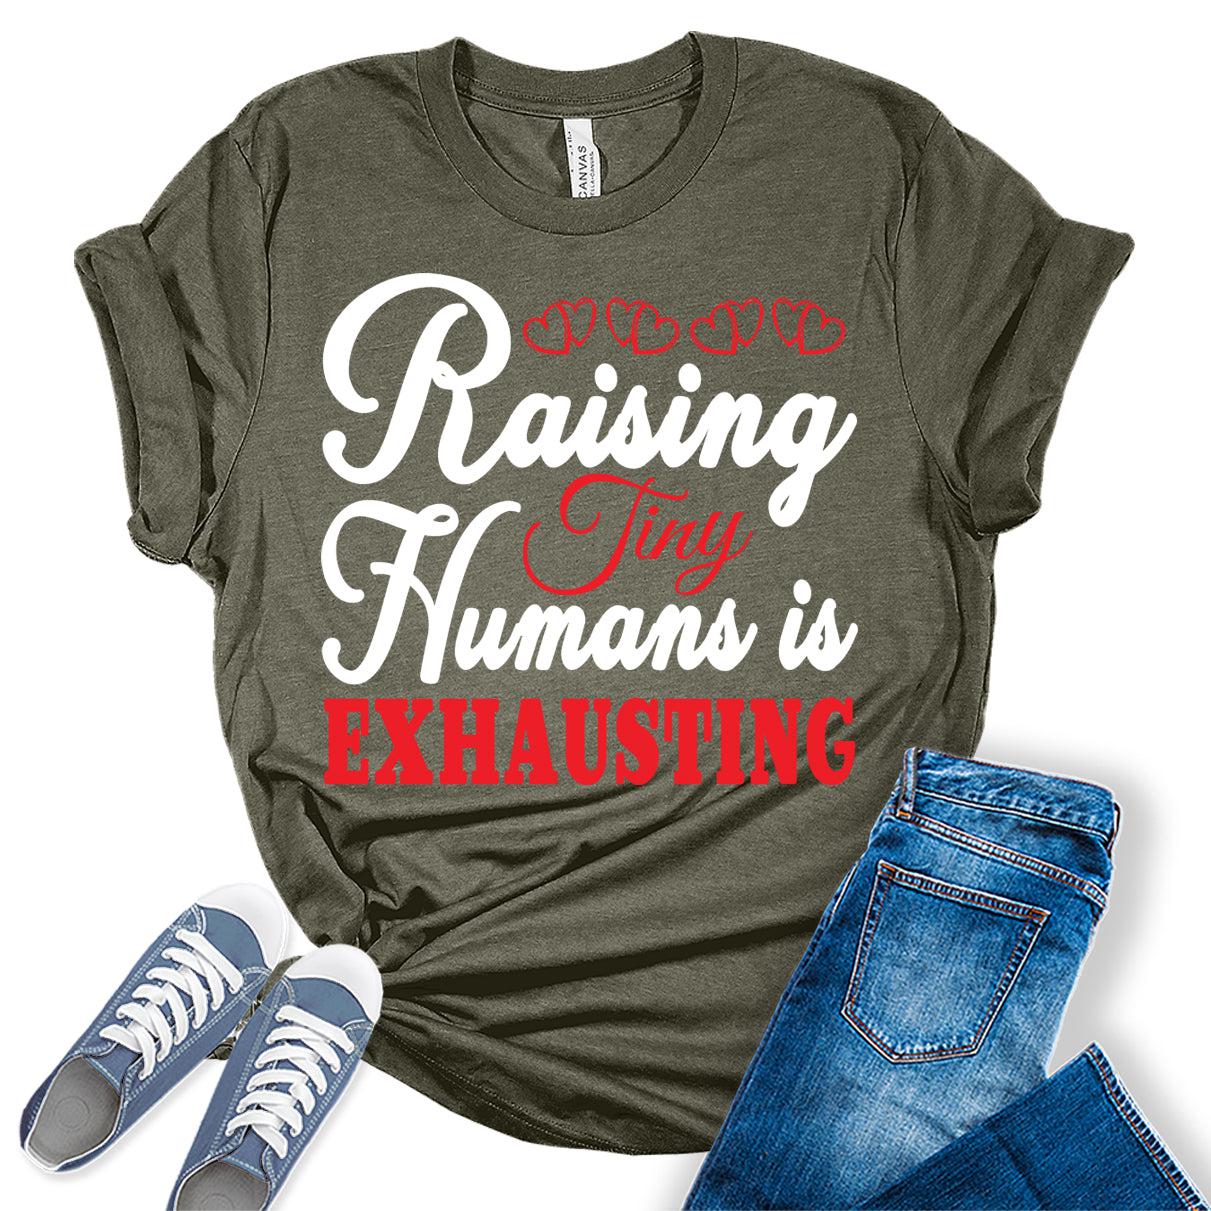 Raising Tiny Human is Exhausting Graphic Tees for Women